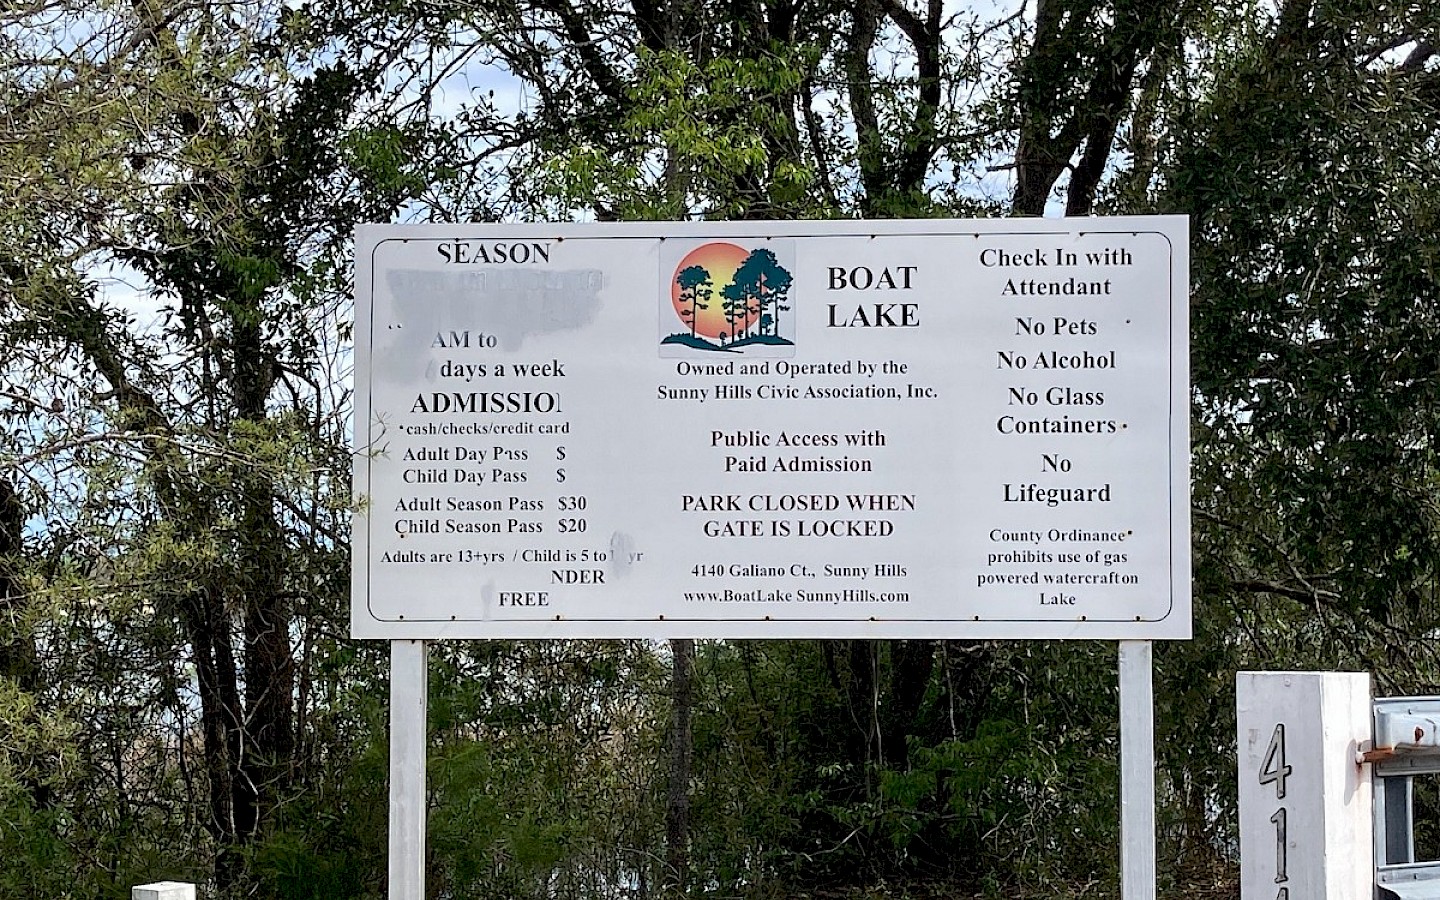 entrance sign to boat lake, states hours, rules - please call them for assistance